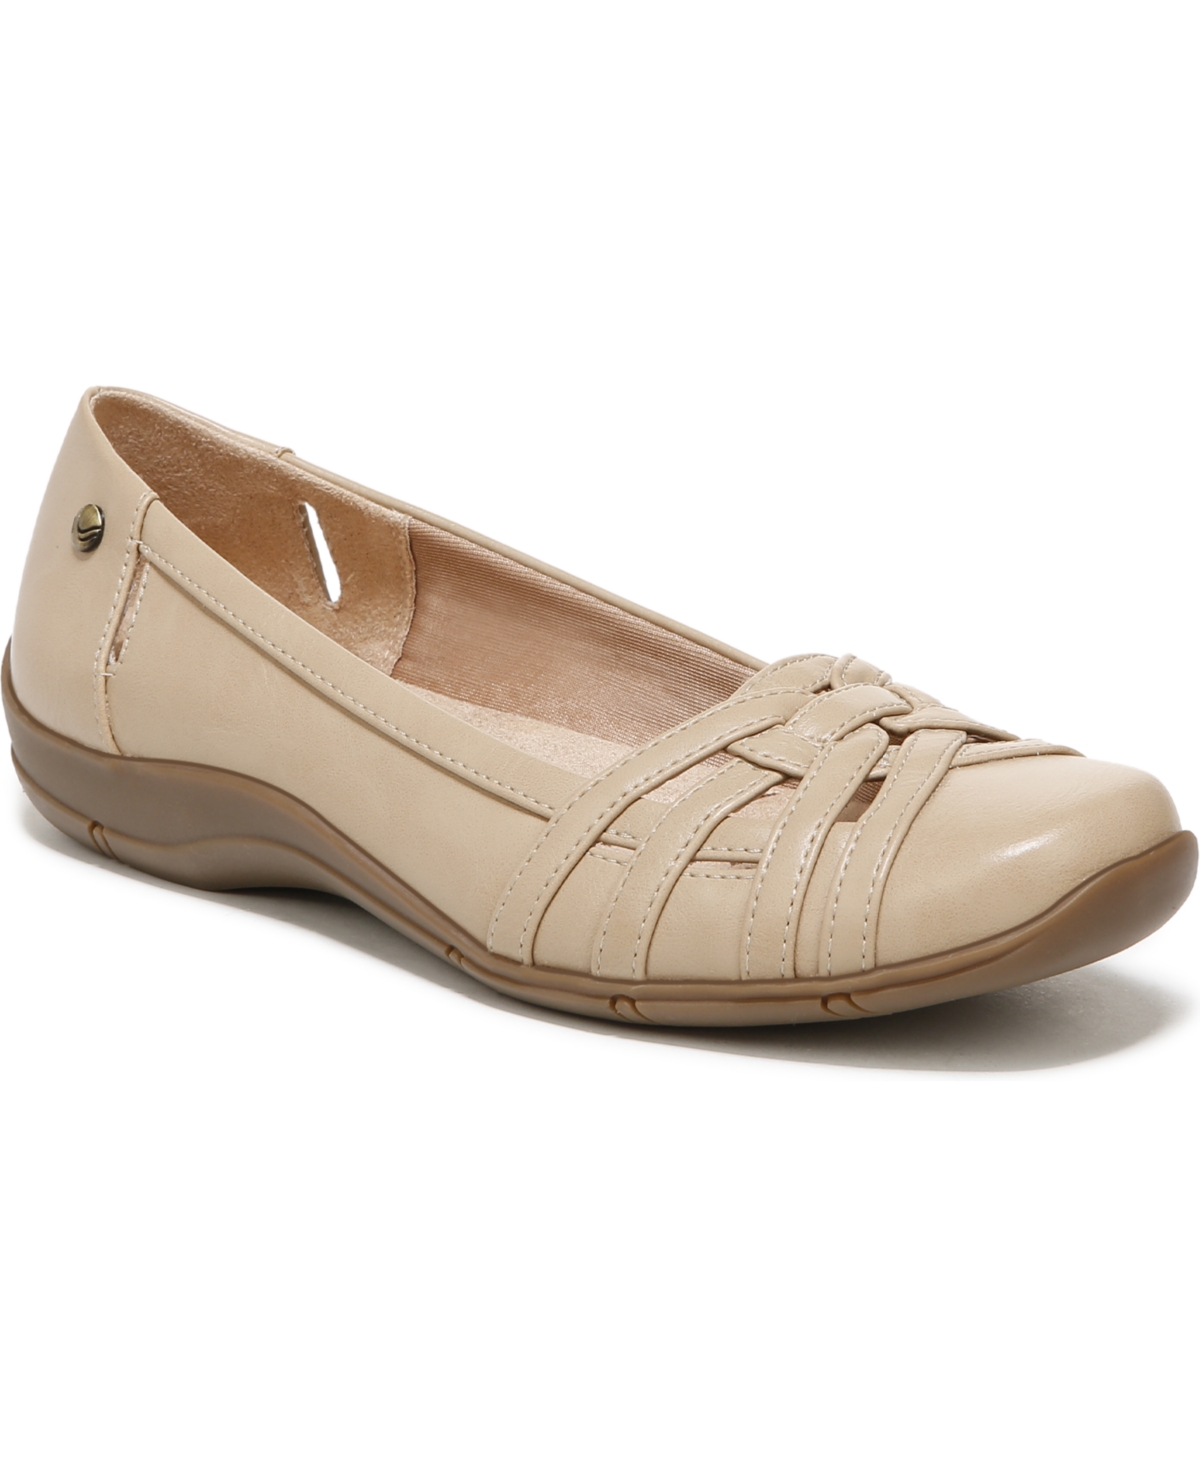 Diverse Flats - Tender Taupe Faux Leather